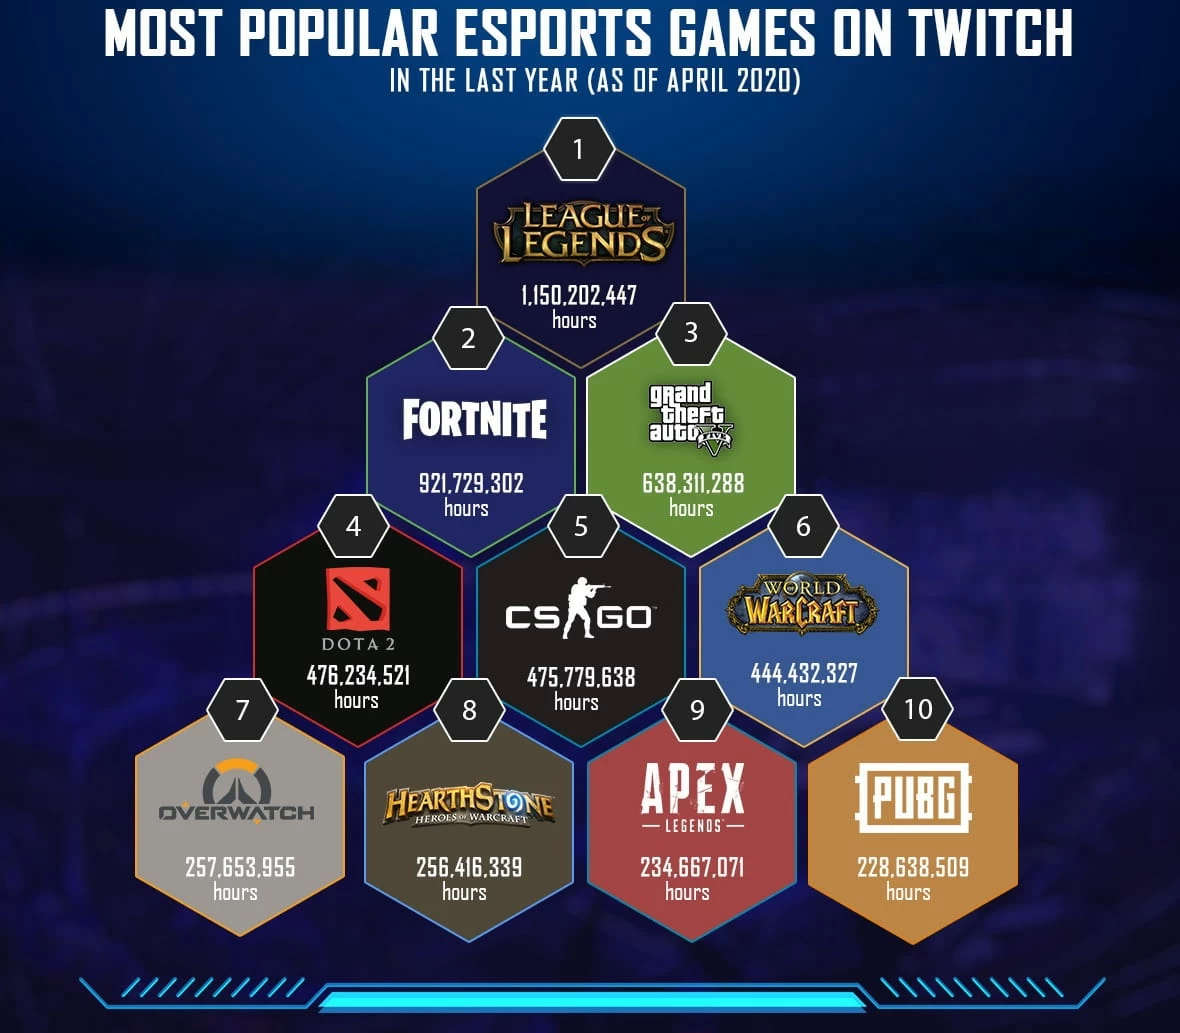 Most Popular eSports Games on Twitch